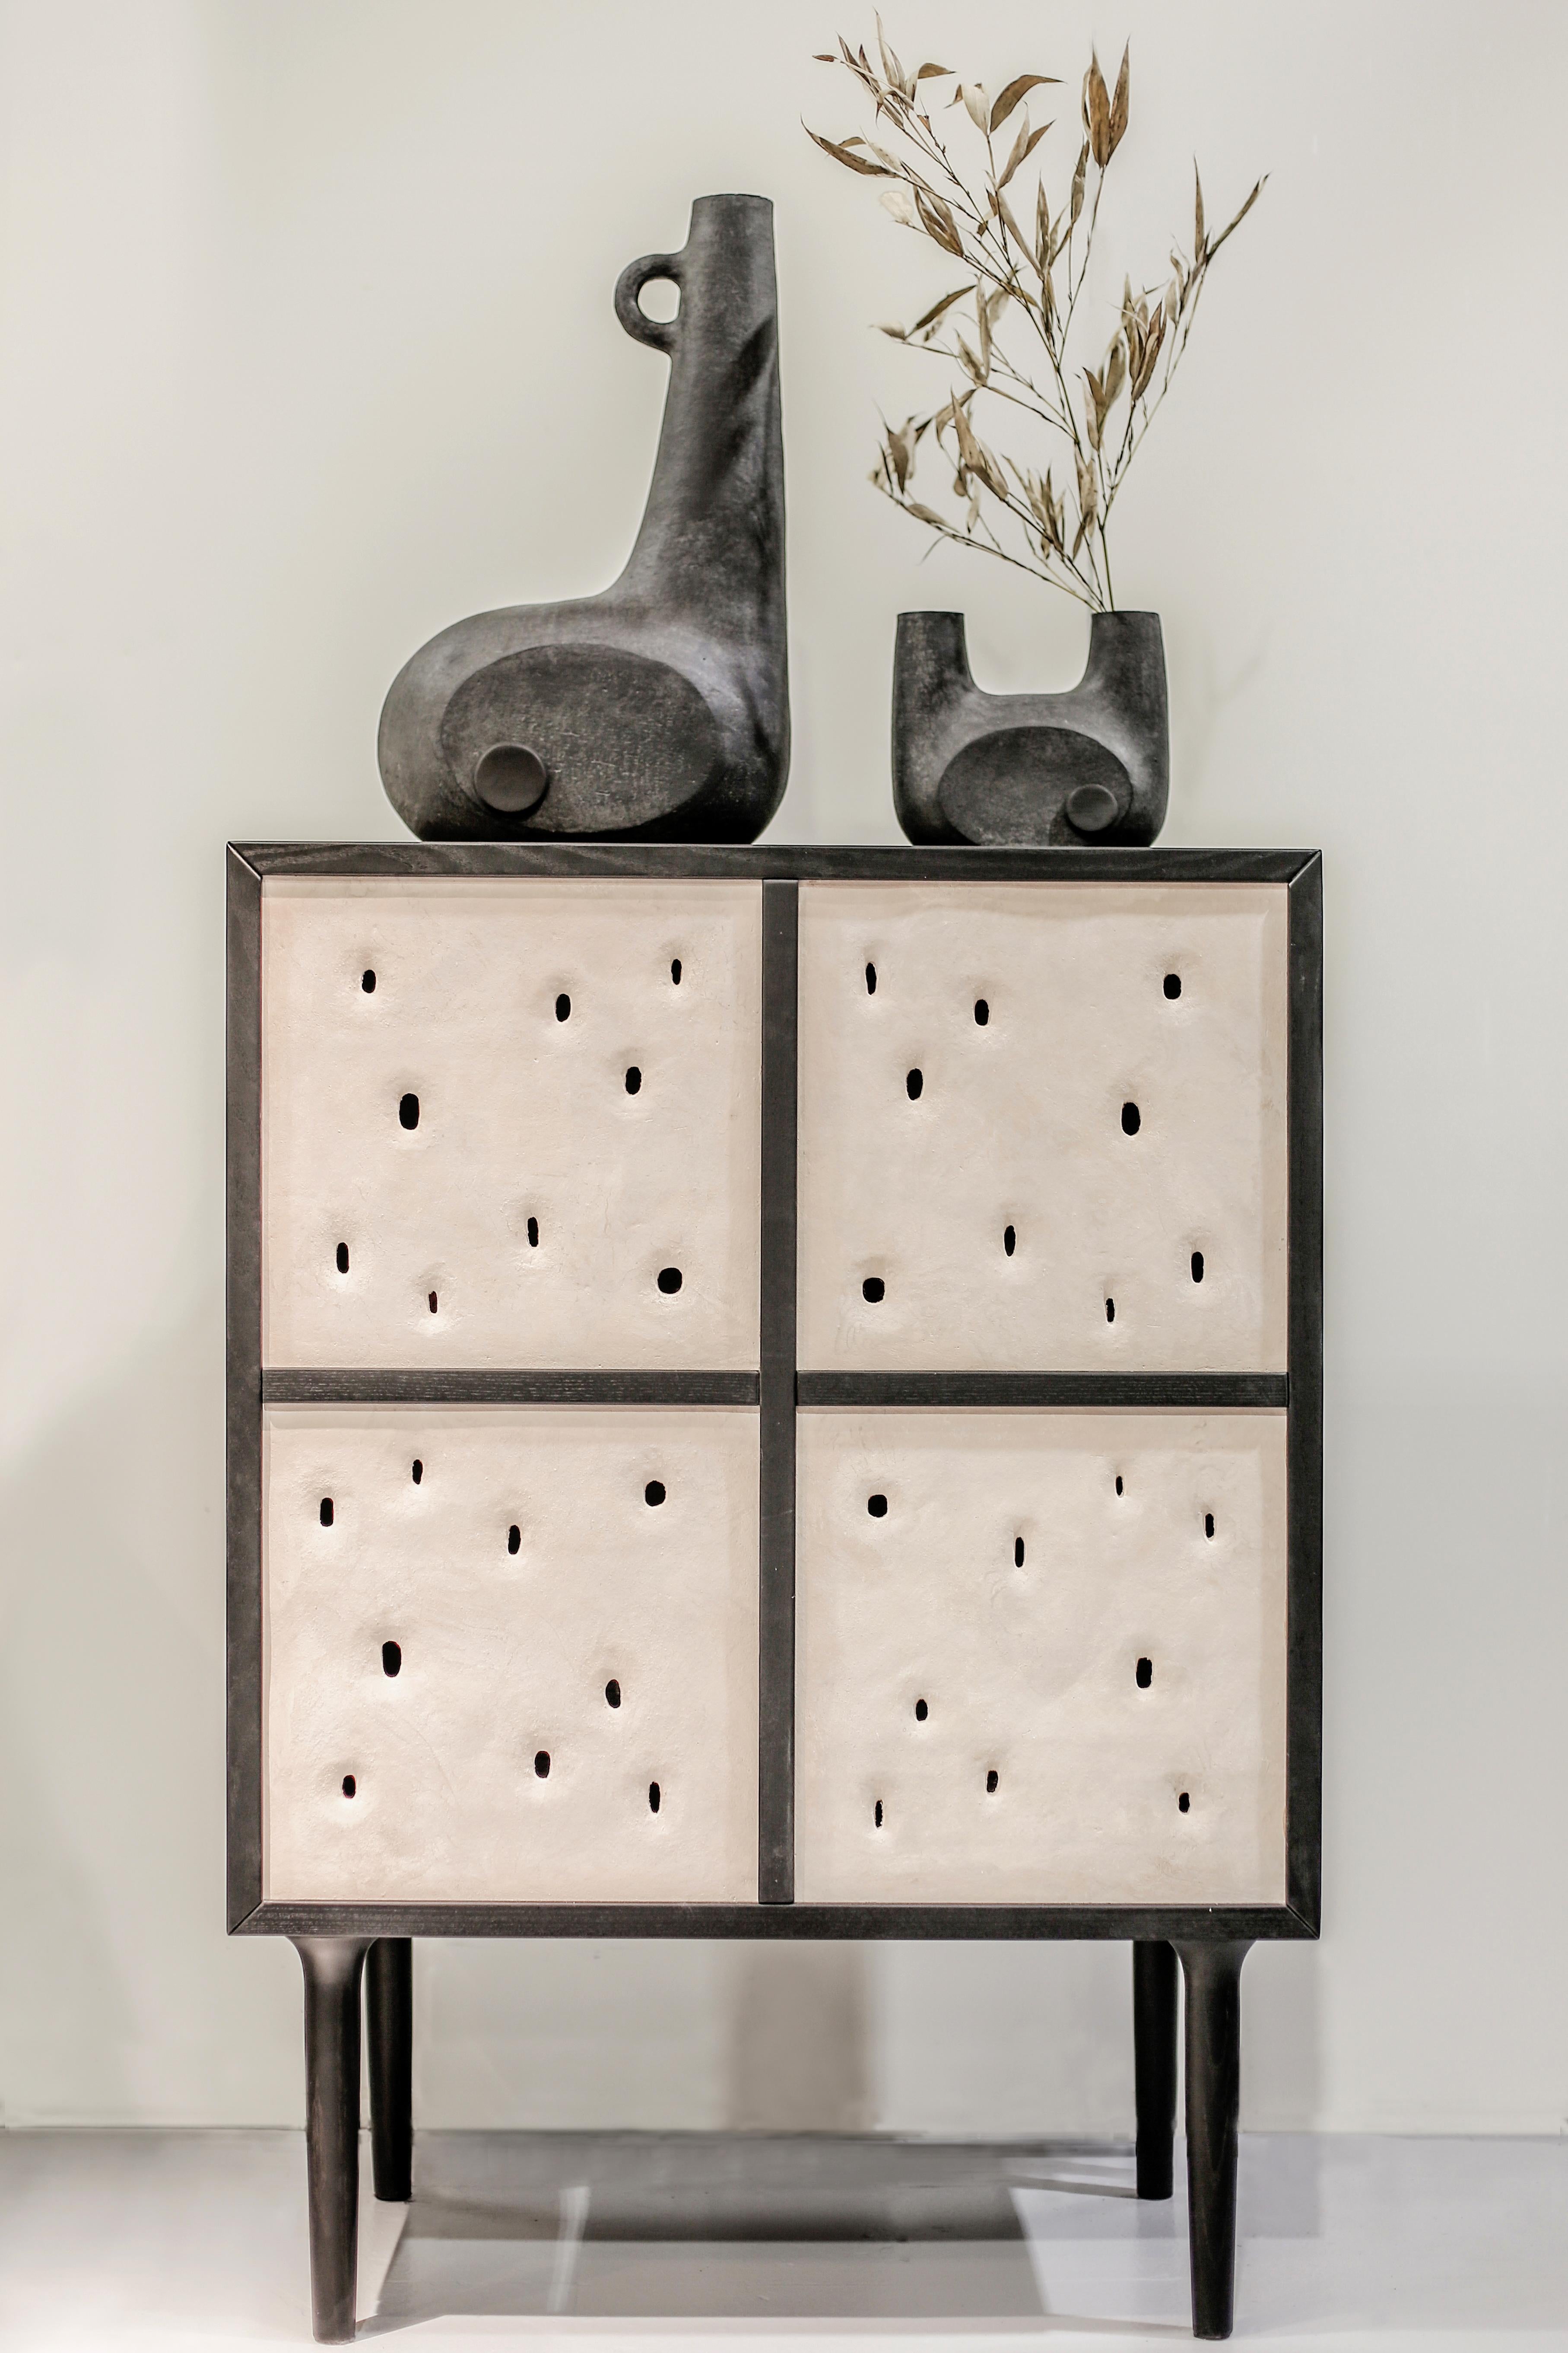 Set of 2 Ceramic Contemporary cabinets by FAINA
Design: Victoriya Yakusha
Material: Clay, Ash
Dimensions: 
76 x 44.3 x H 106 cm
175 x 50 x H 58.5 cm
Made in the style of ethnic minimalism, the collection items introduce “naive design”- simple in